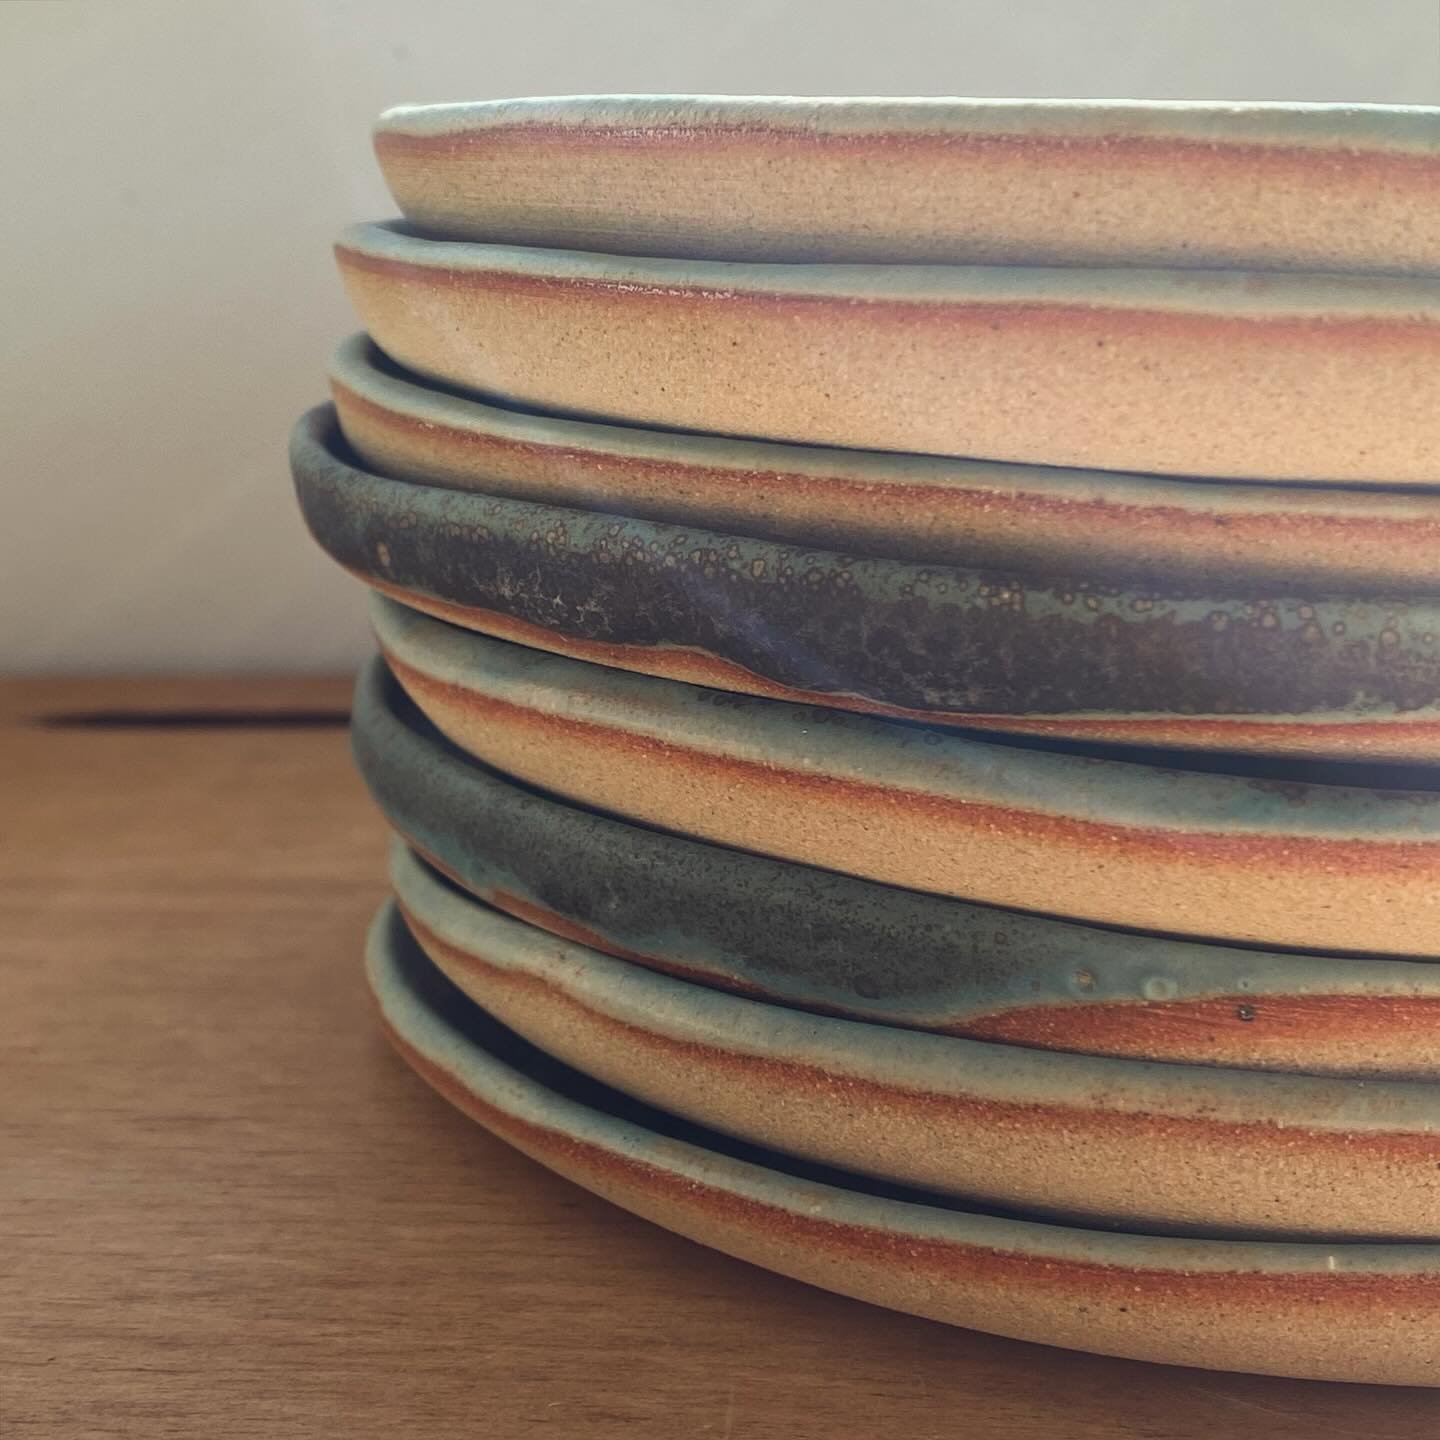 A simple stack. 
#sideplates #madewithkeanes #keanesironstone #slabbuilt